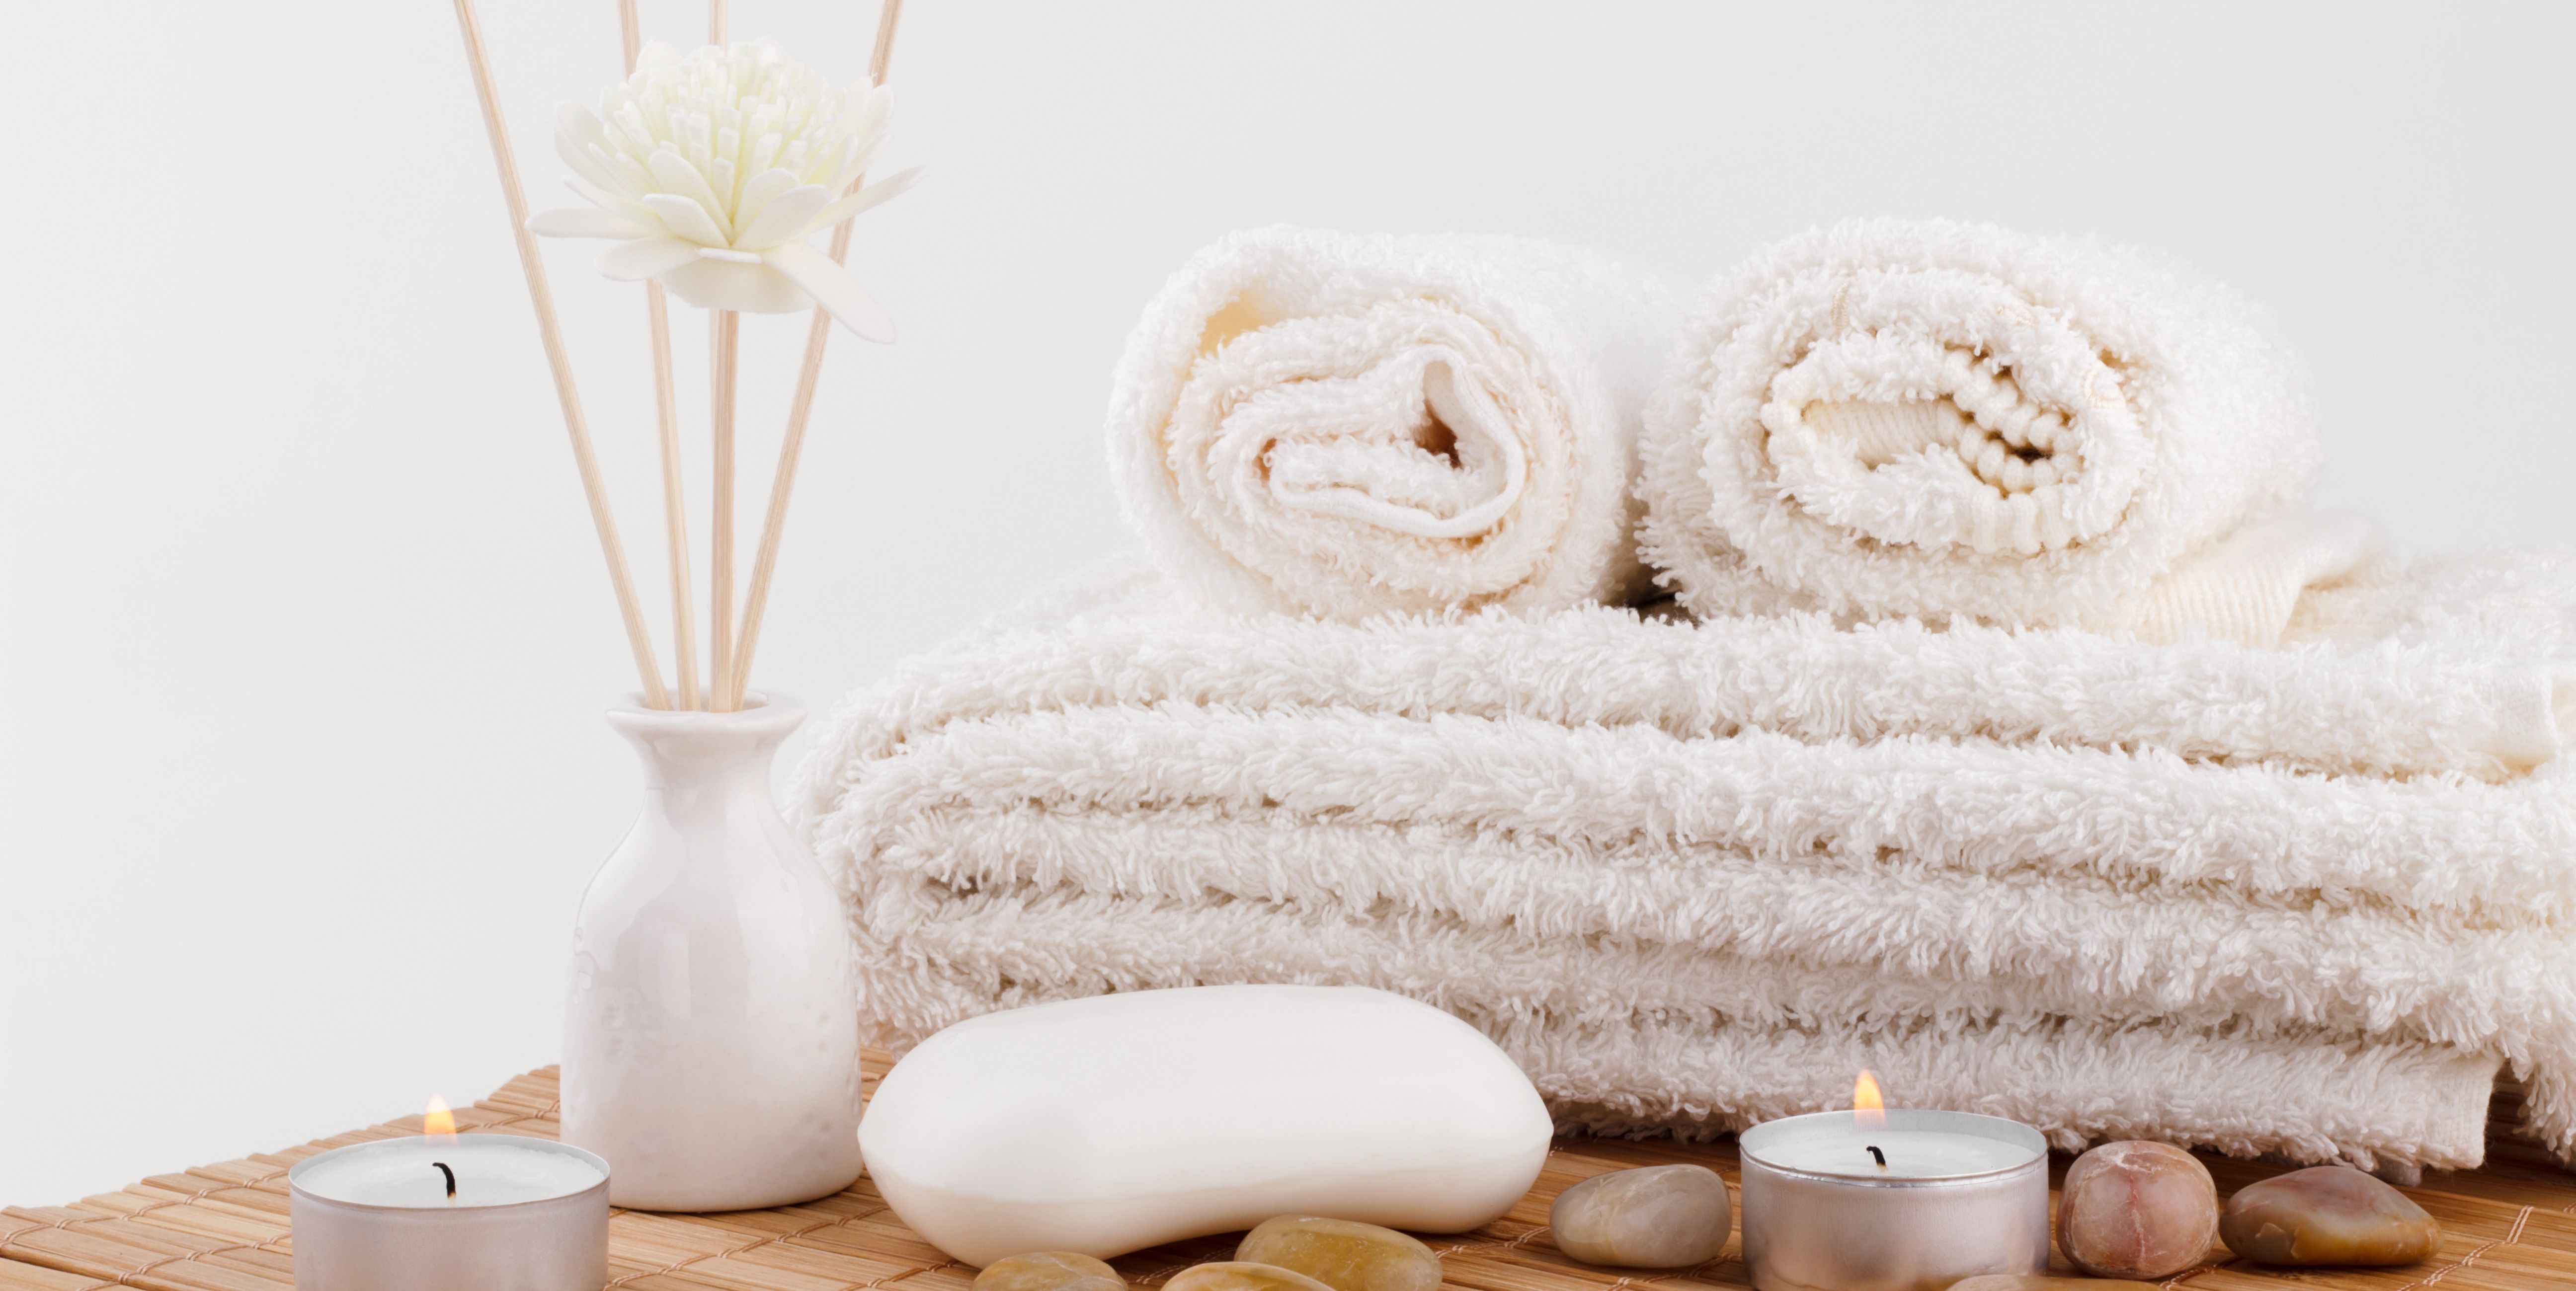 10 Best Towel Warmers for Cozy, Post-Shower Bliss